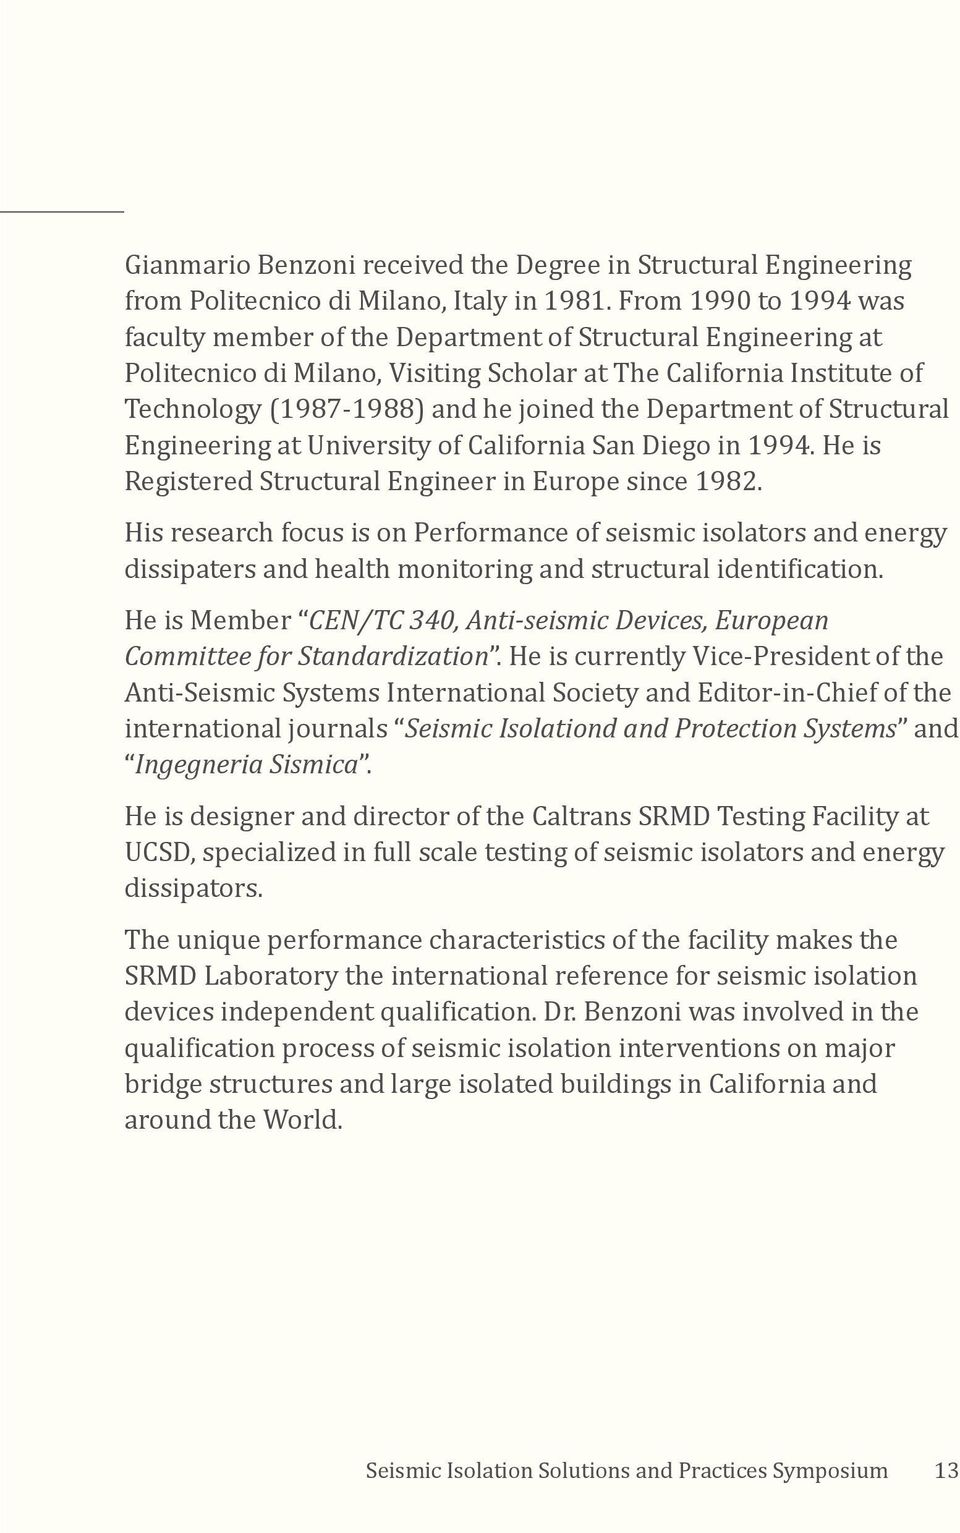 Department of Structural Engineering at University of California San Diego in 1994. He is Registered Structural Engineer in Europe since 1982.